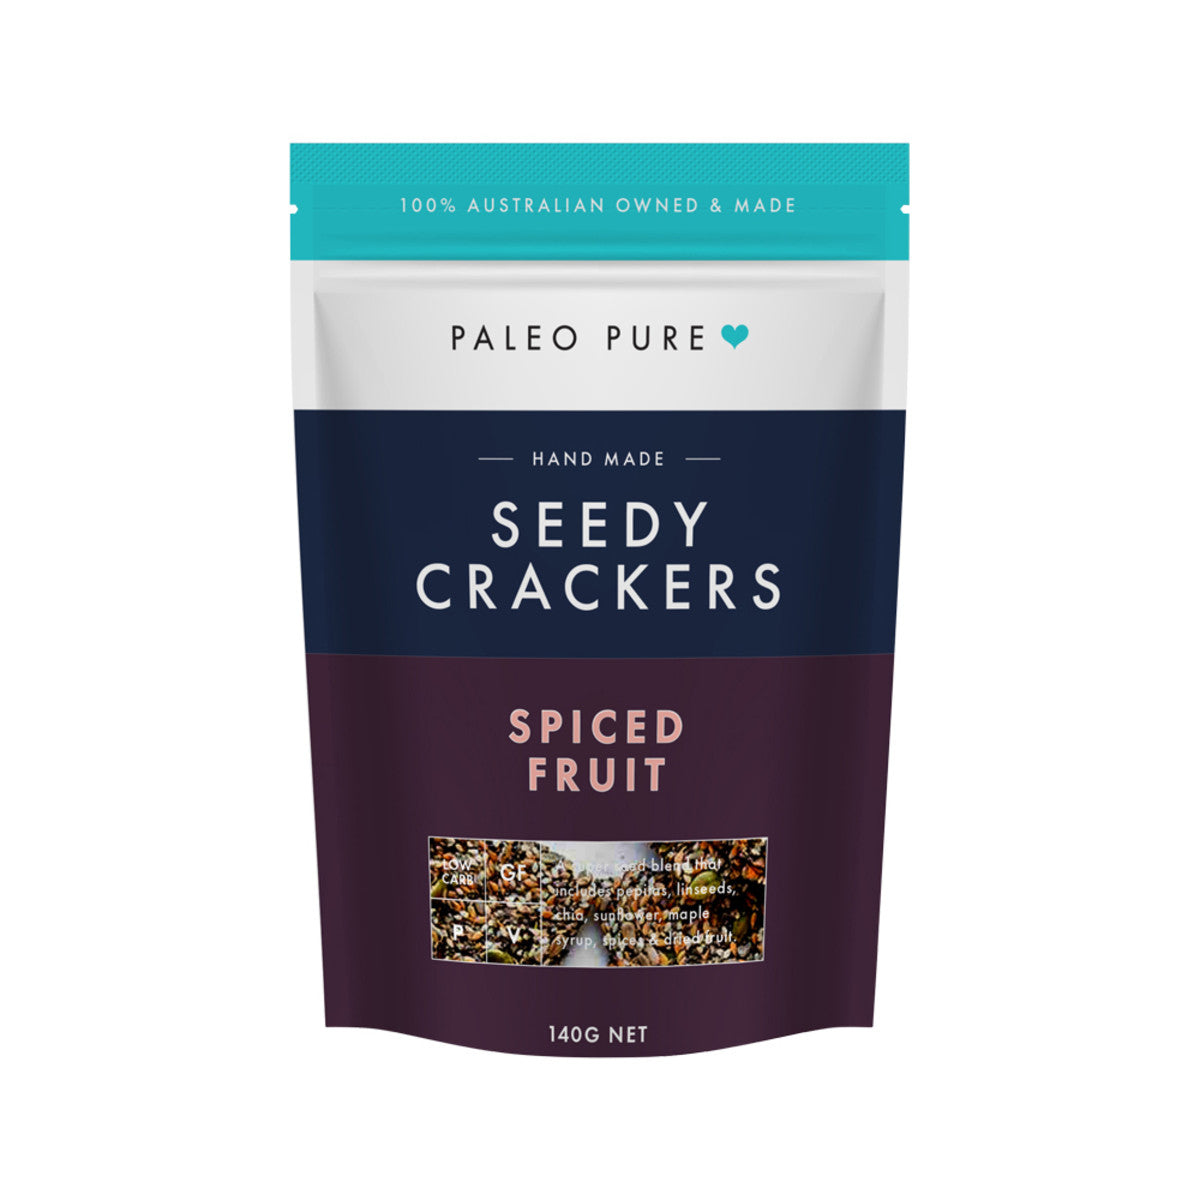 Paleo Pure Seedy Crackers 140gm, Spiced Fruit Flavour